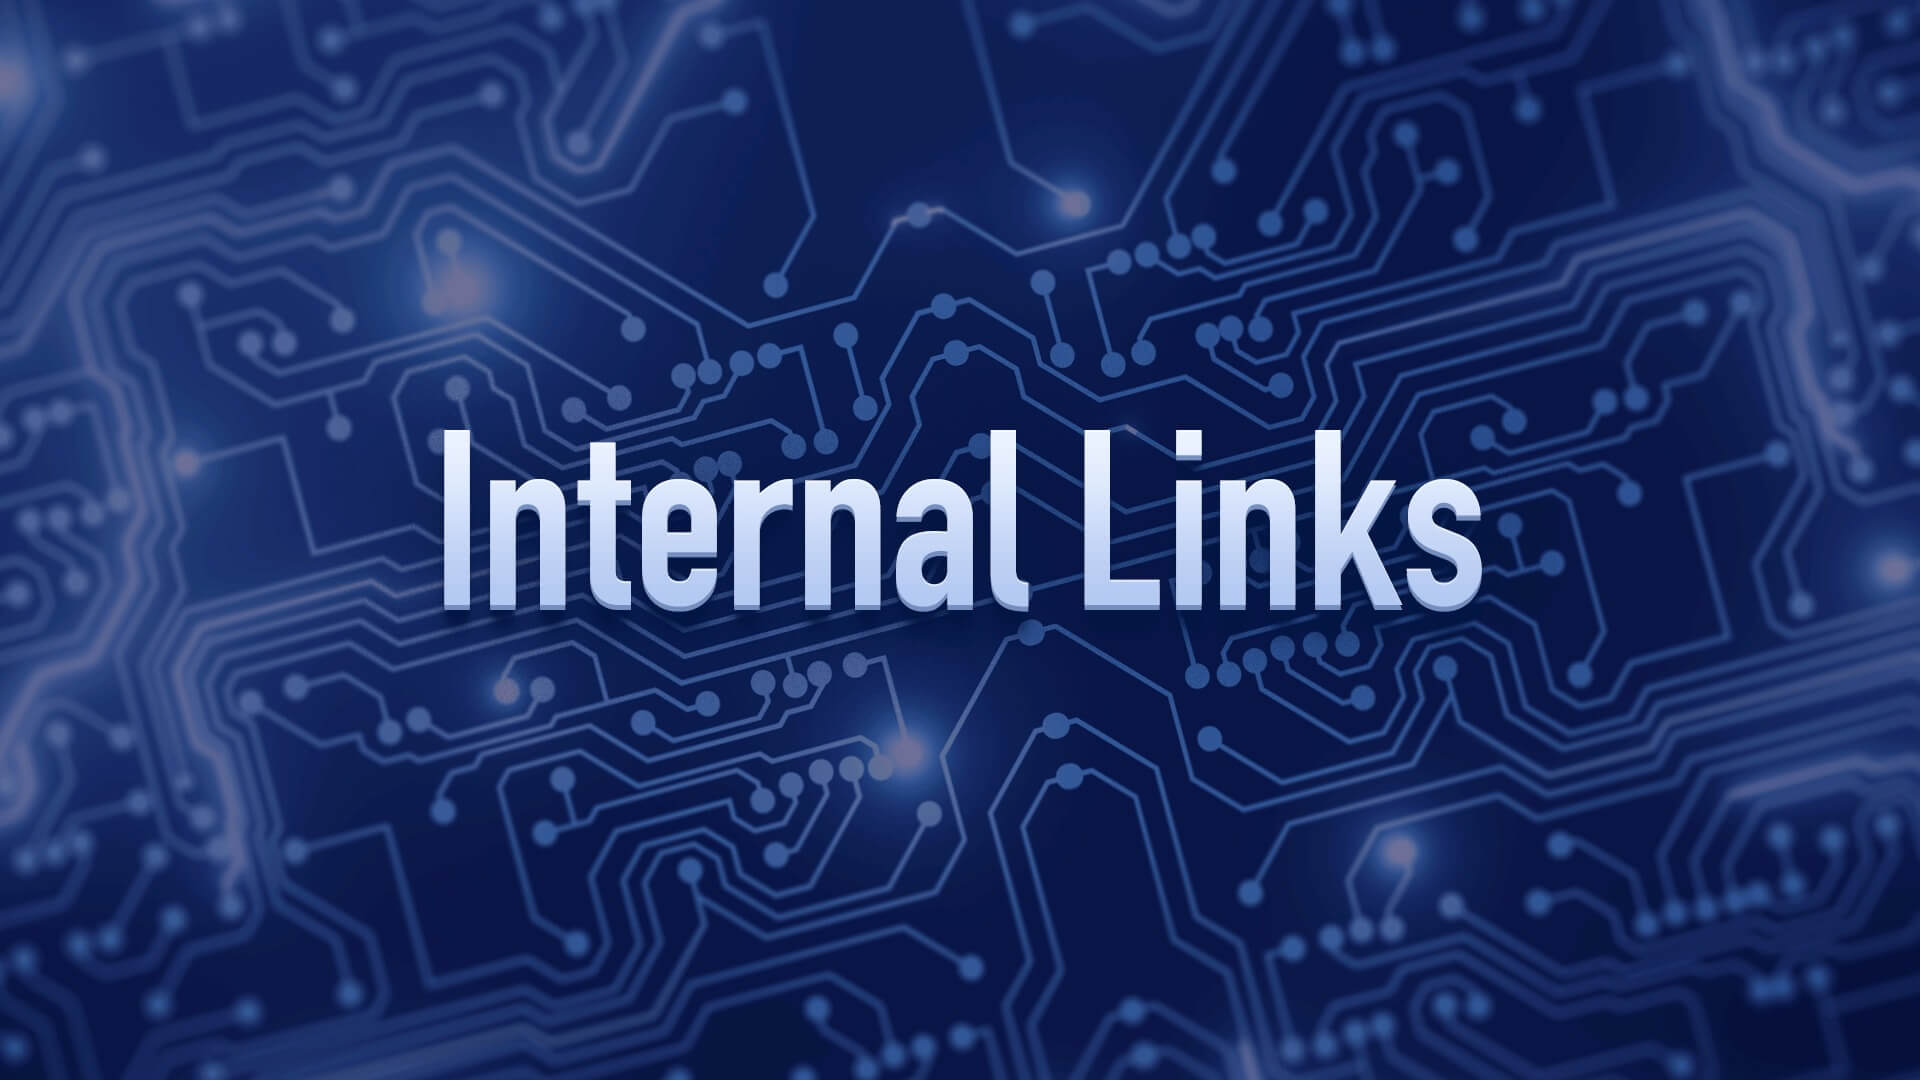 Internal Linking: Building a Strong Web Structure for SEO